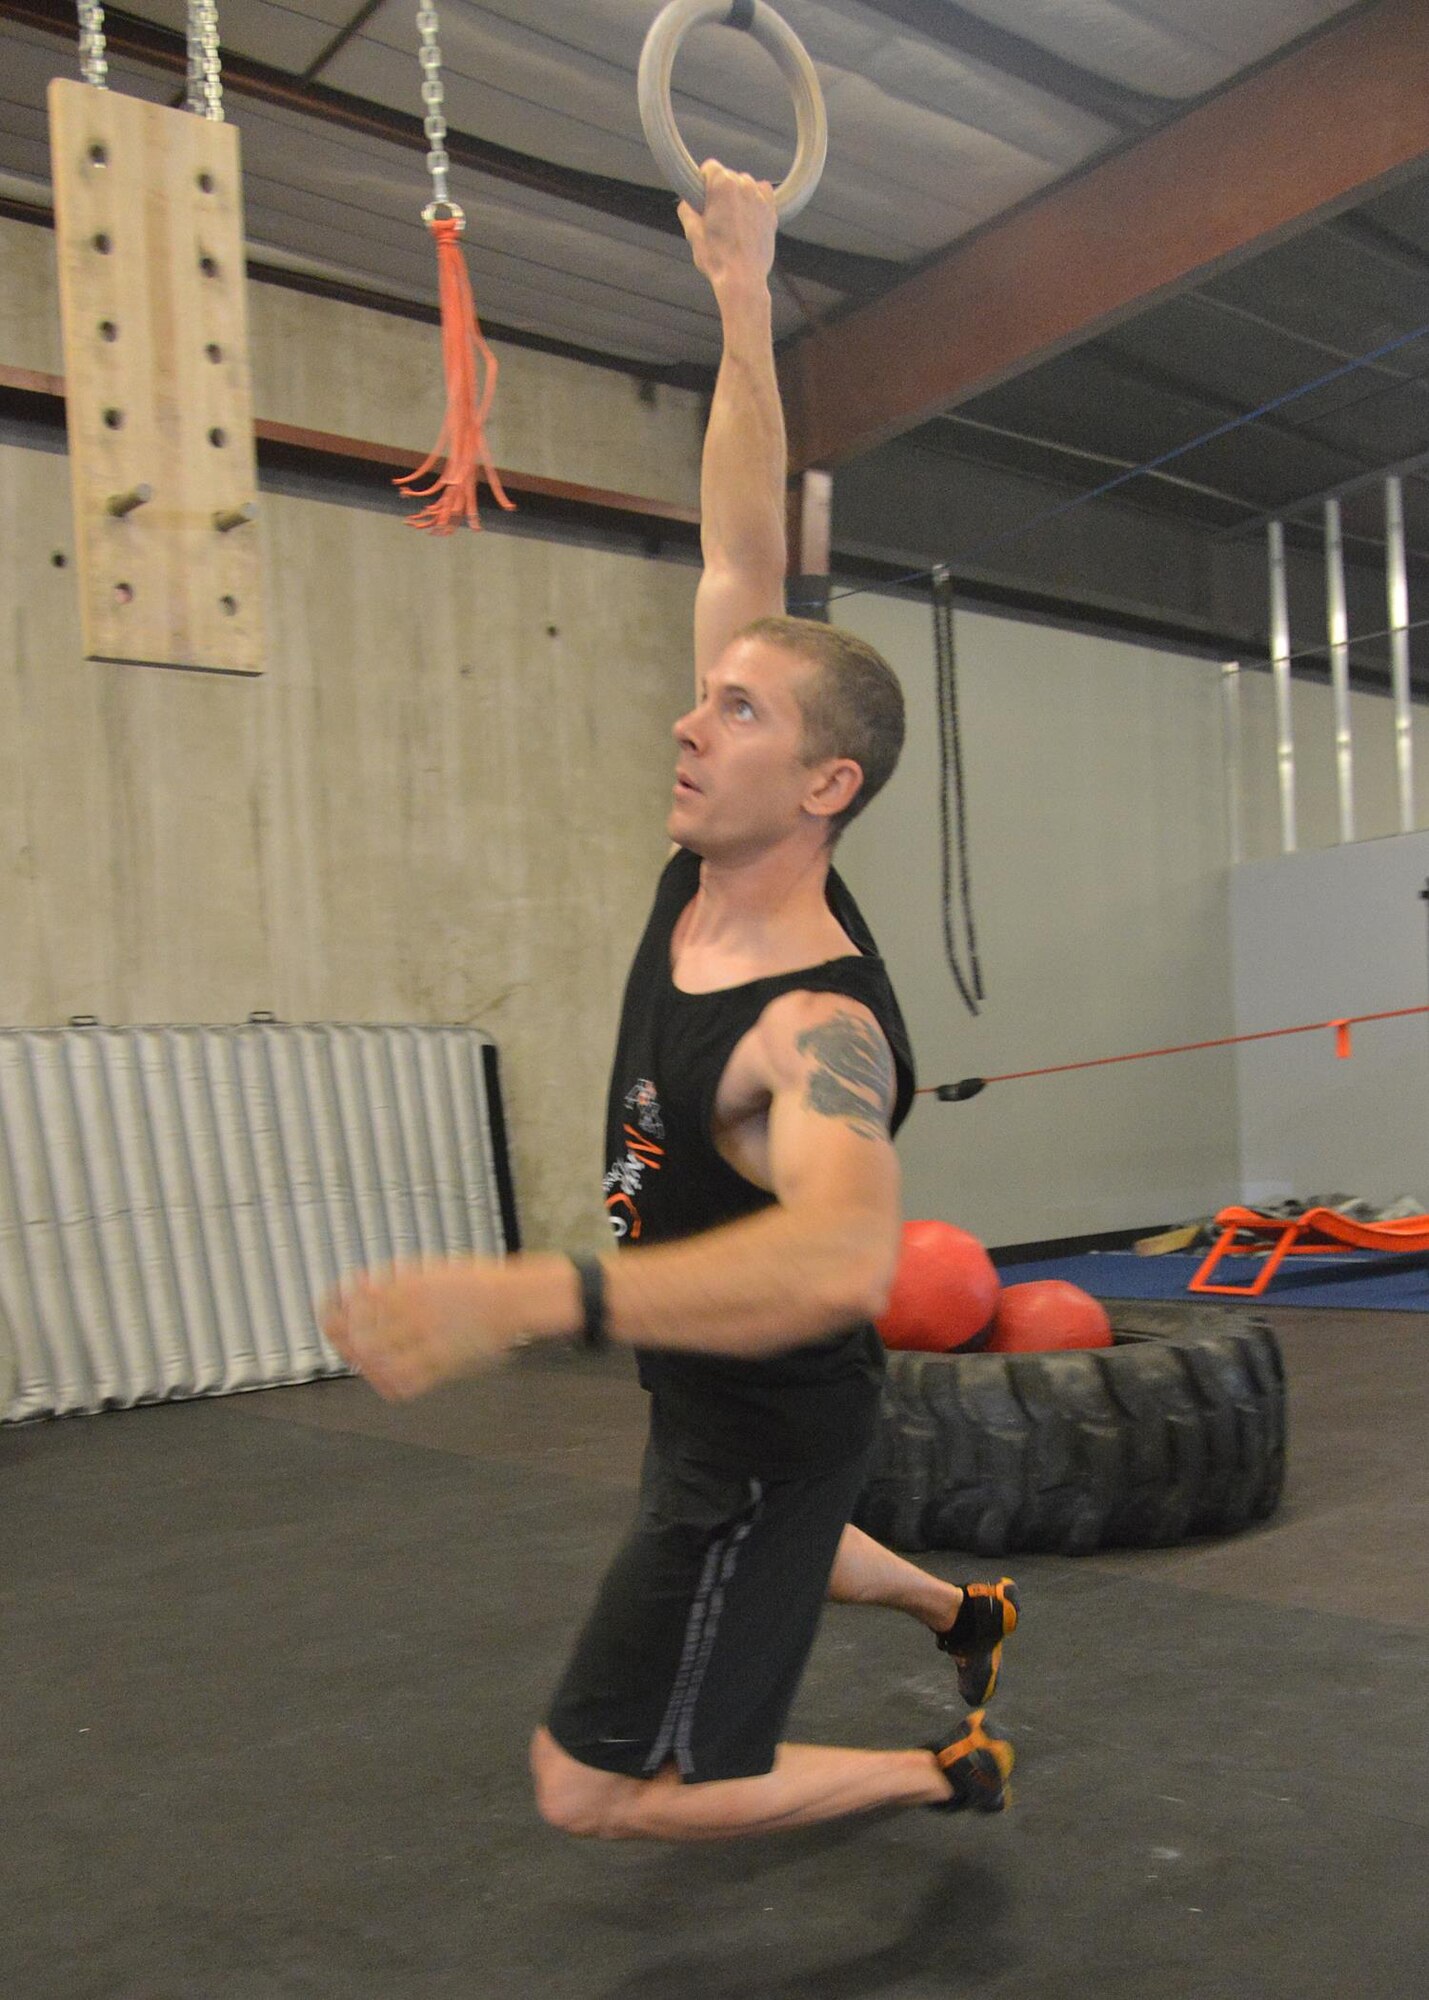 2nd Lt. Eddie Hilburn, an optical physicist at the Air Force Research Laboratory’s Starfire Optical Range, trains at Ninja Core Obstacle Gym in Albuquerque, hoping to enter the TV show “American Ninja Warrior.” (Photo by Todd Berenger)